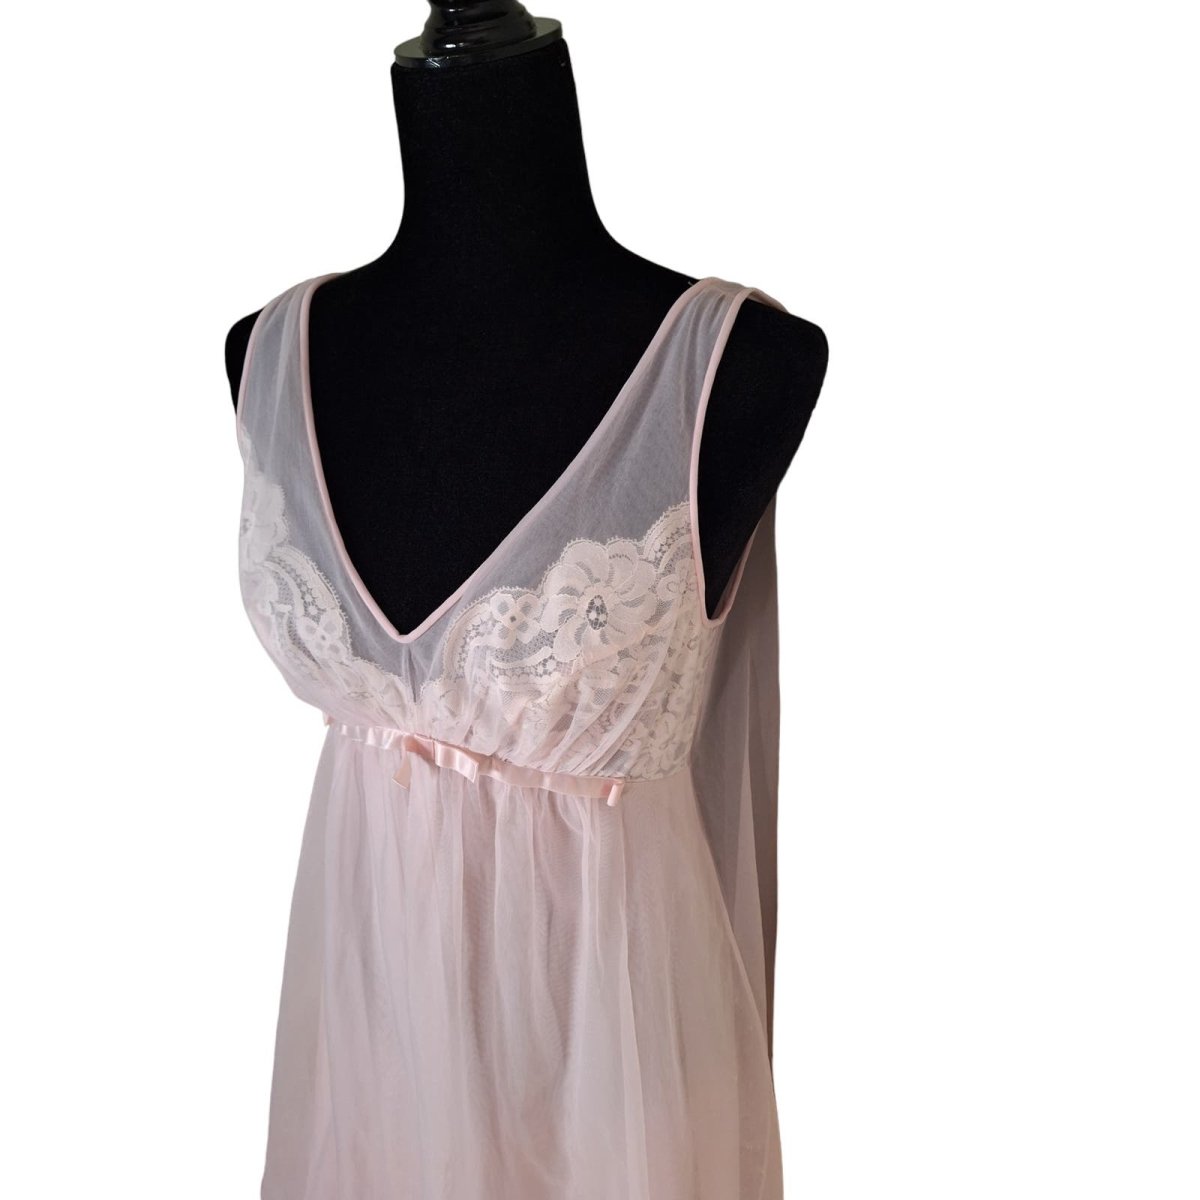 Vintage 1960s Semi-Sheer Pink Lace Bodice Nightgown Women Size 34 Small - themallvintage The Mall Vintage